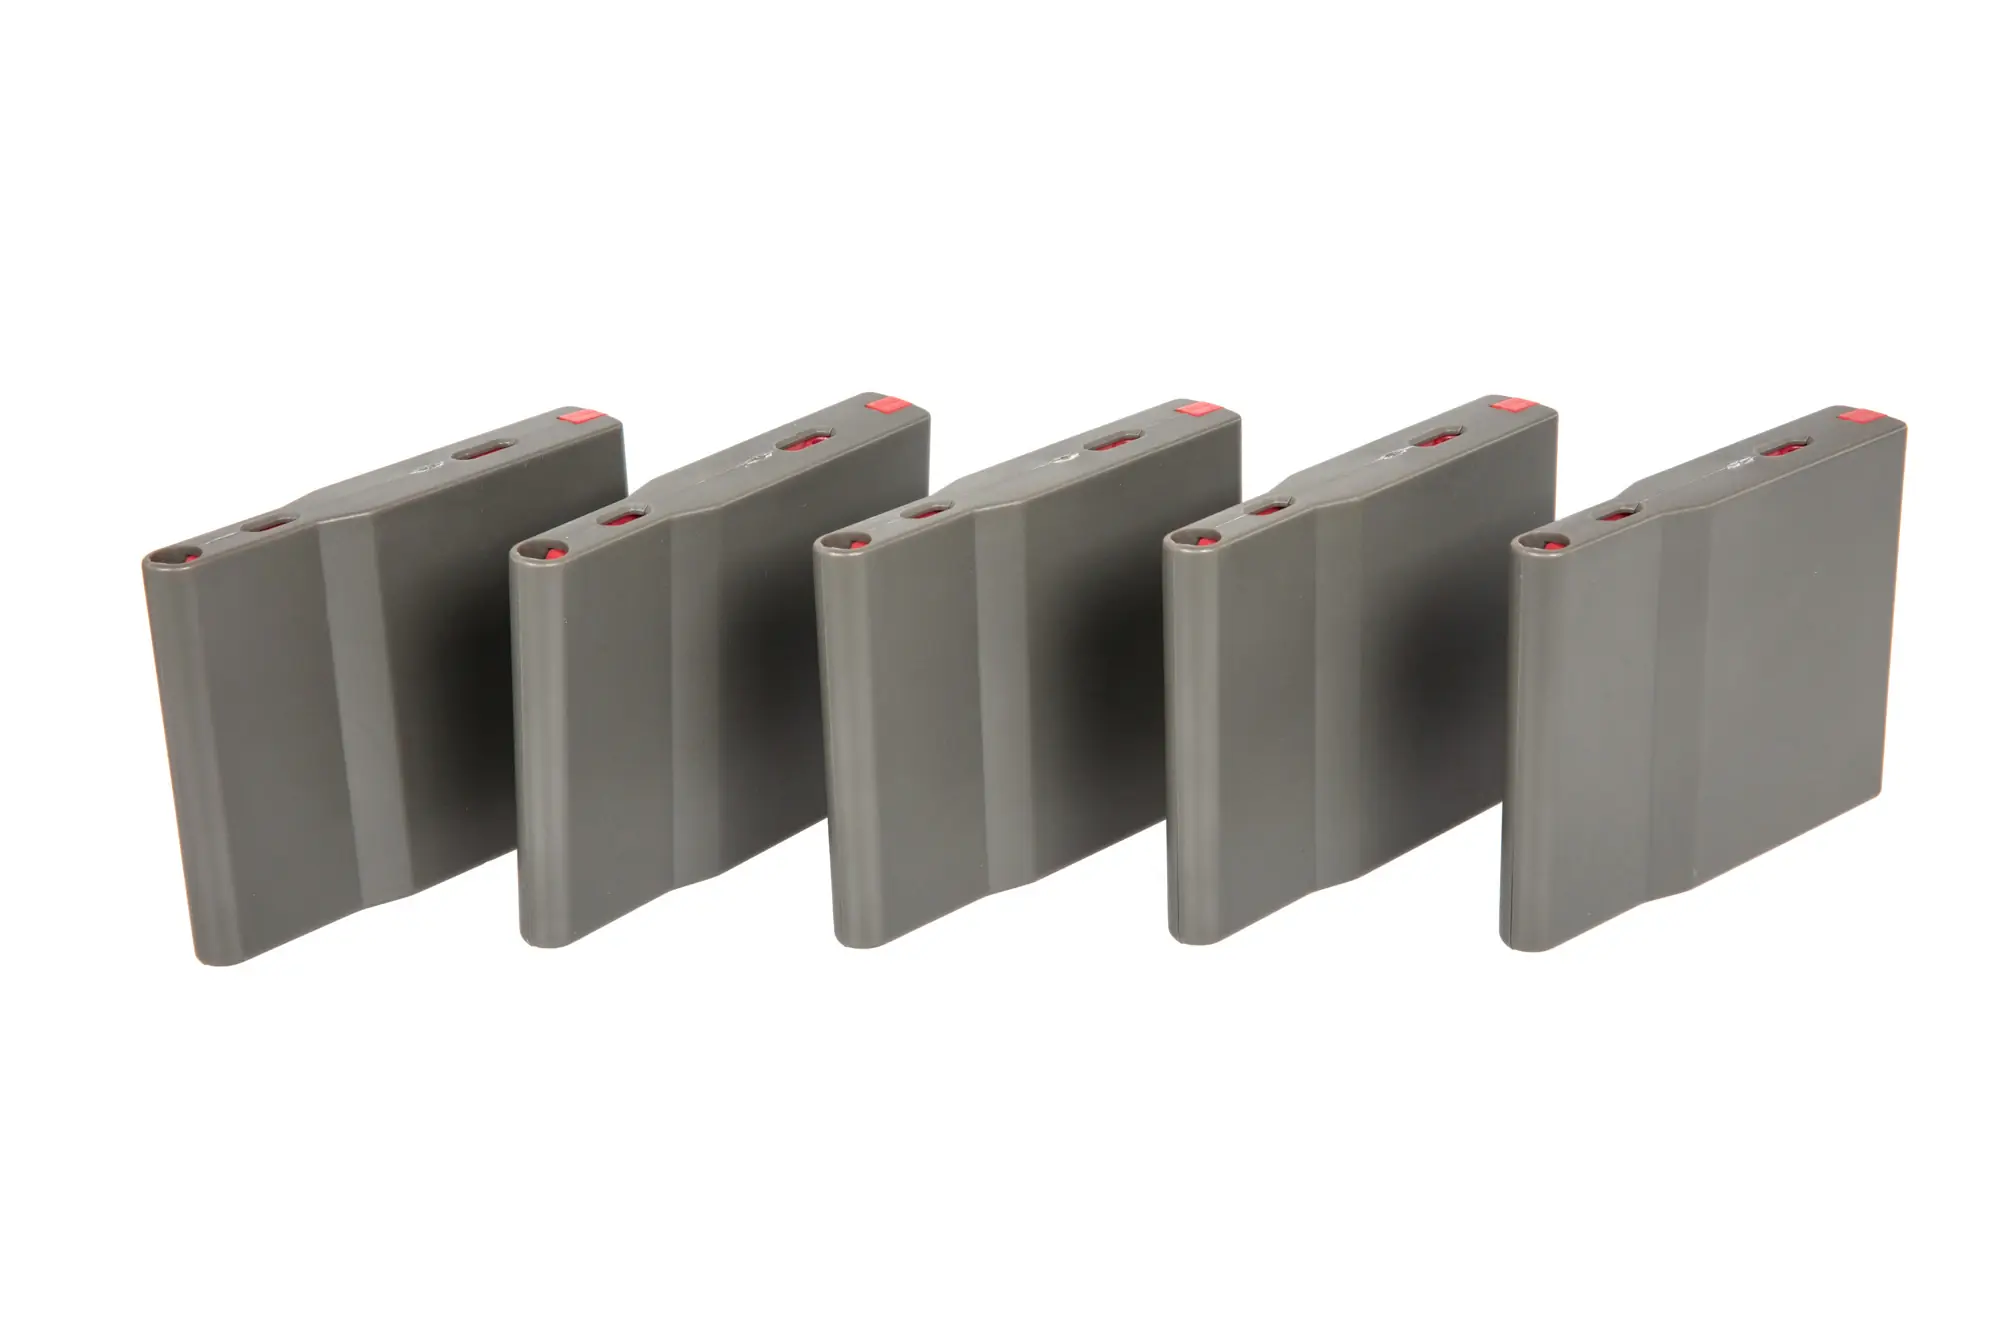 Set of 5 polymer magazines for SRS Silverback replicas Olive